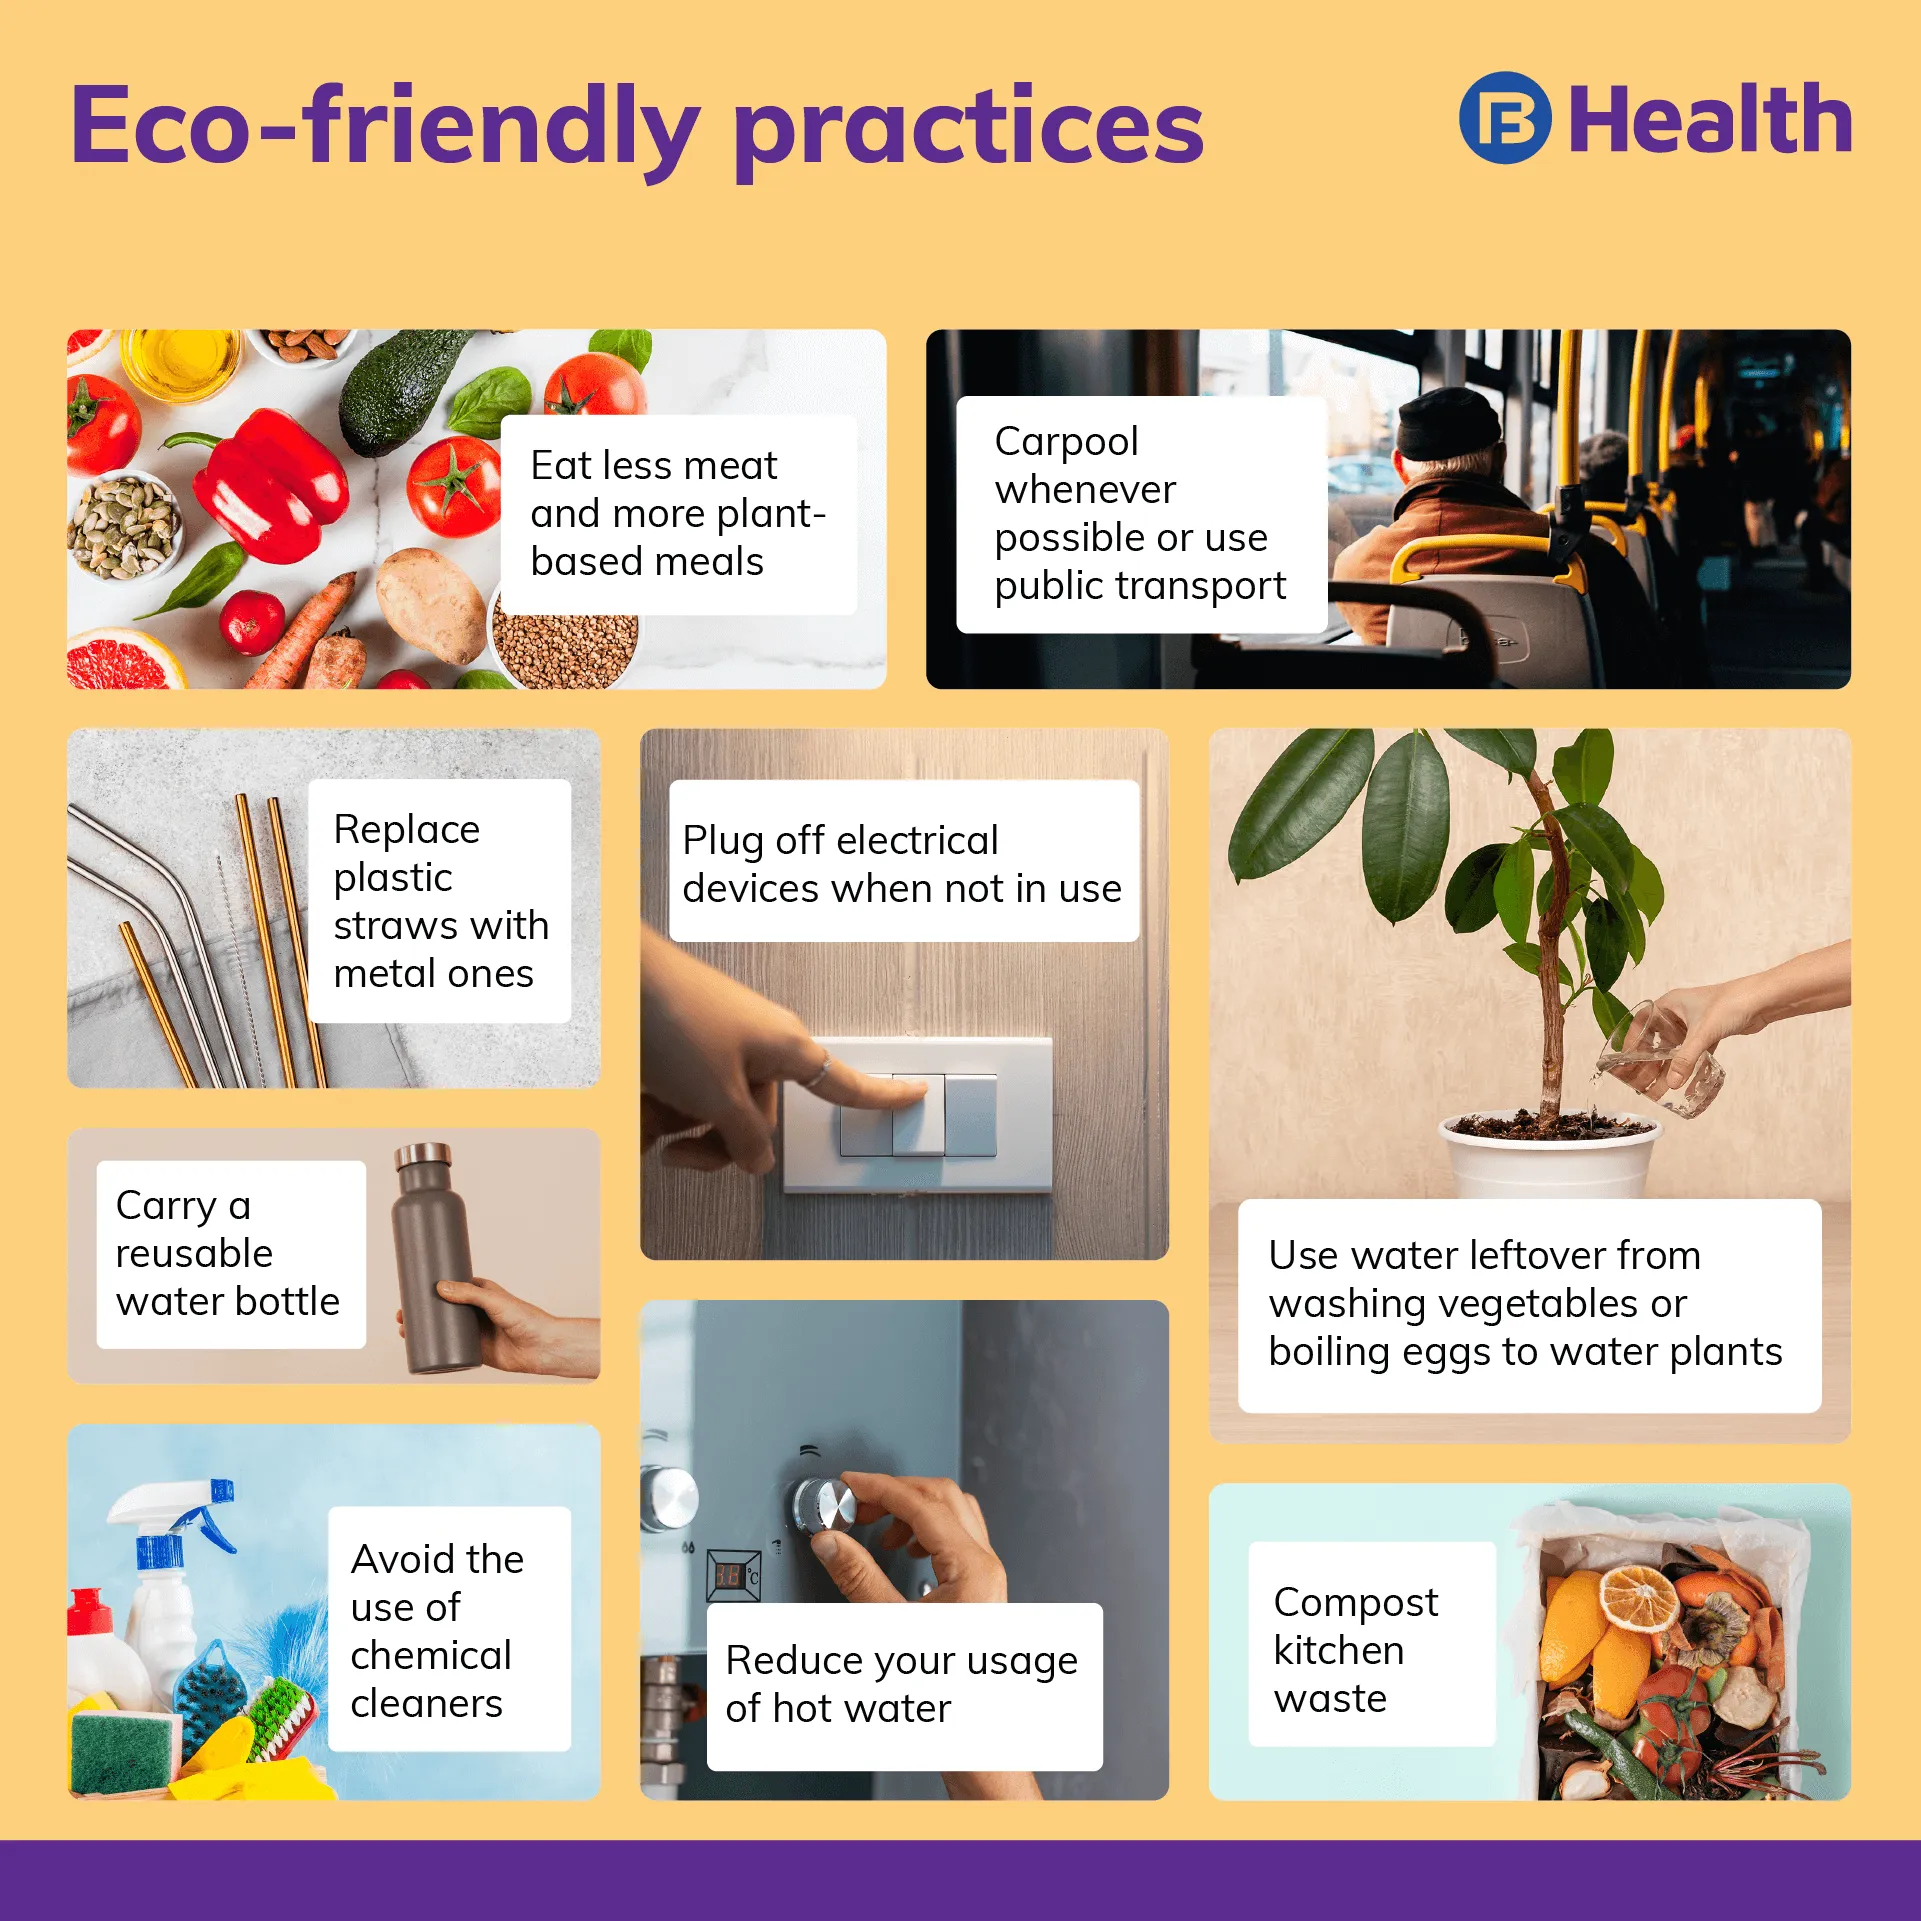 Healthy environment practices